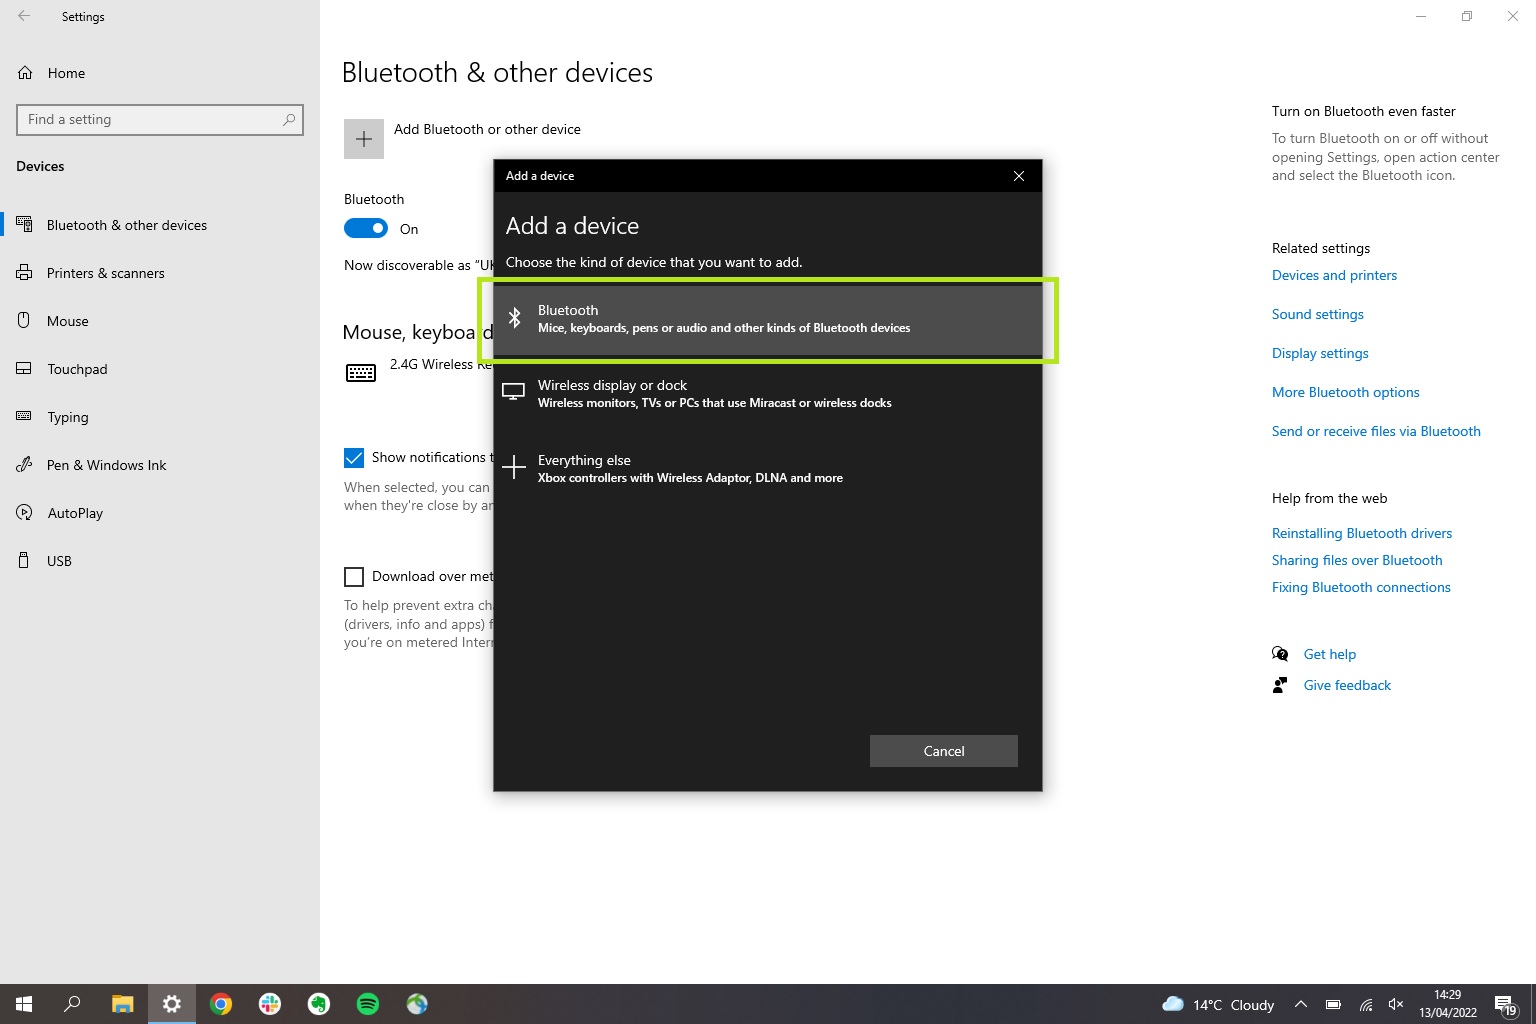 A screenshot showing the Windows 10 Bluetooth menu showing how to connect the AirPods to the PC